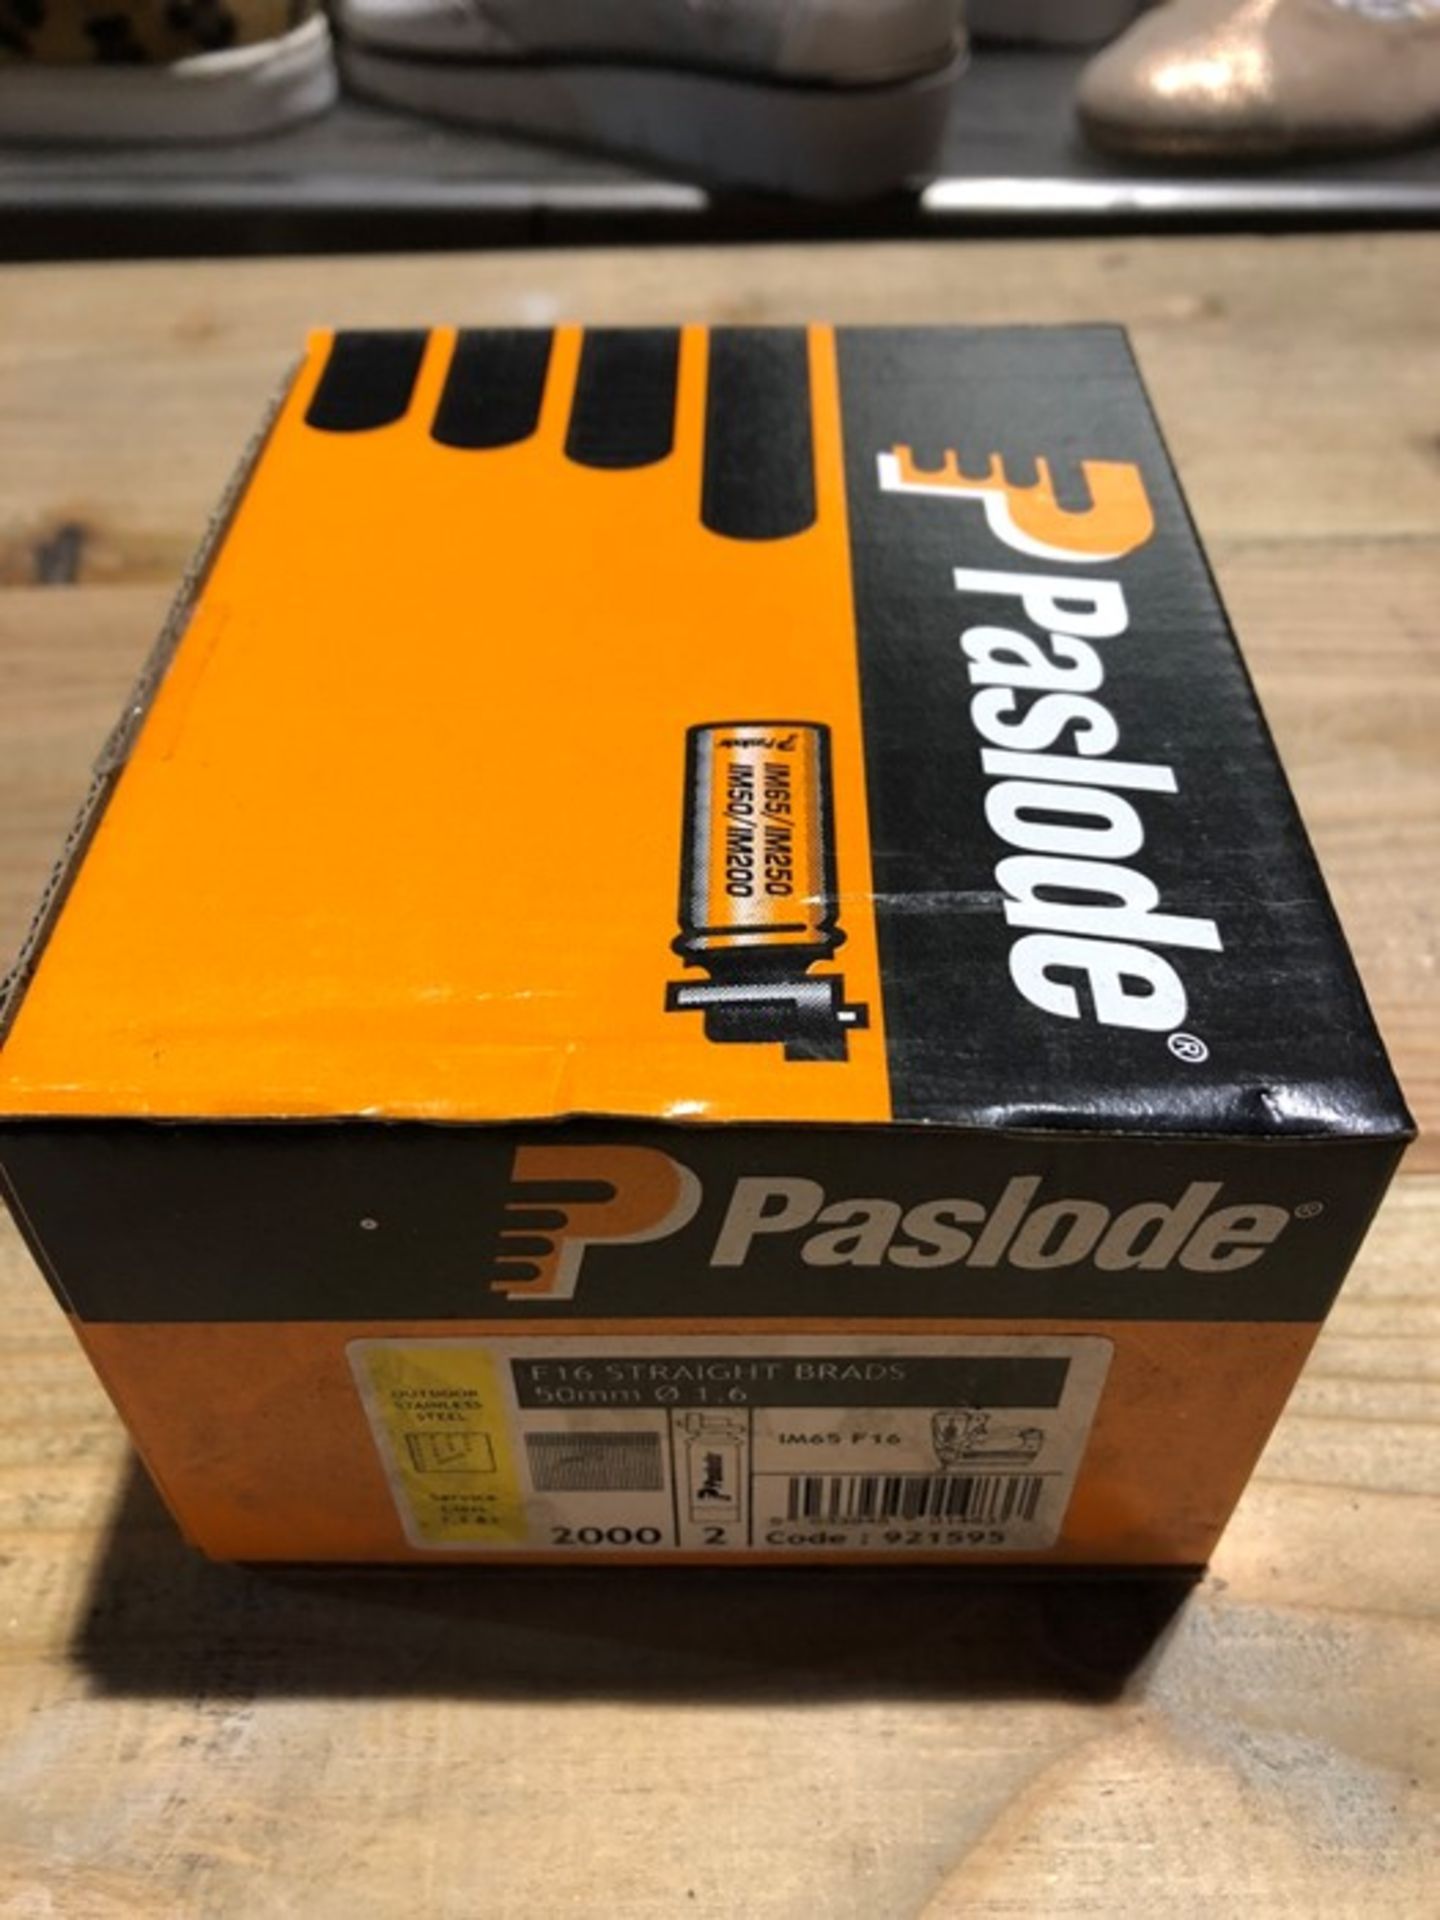 1 BOX OF PASLODE F16 STRAIGHT BRAD STAINLESS STEEL NAILS WITH 2 FUEL CELLS - APPROX 2000 PER BOX /